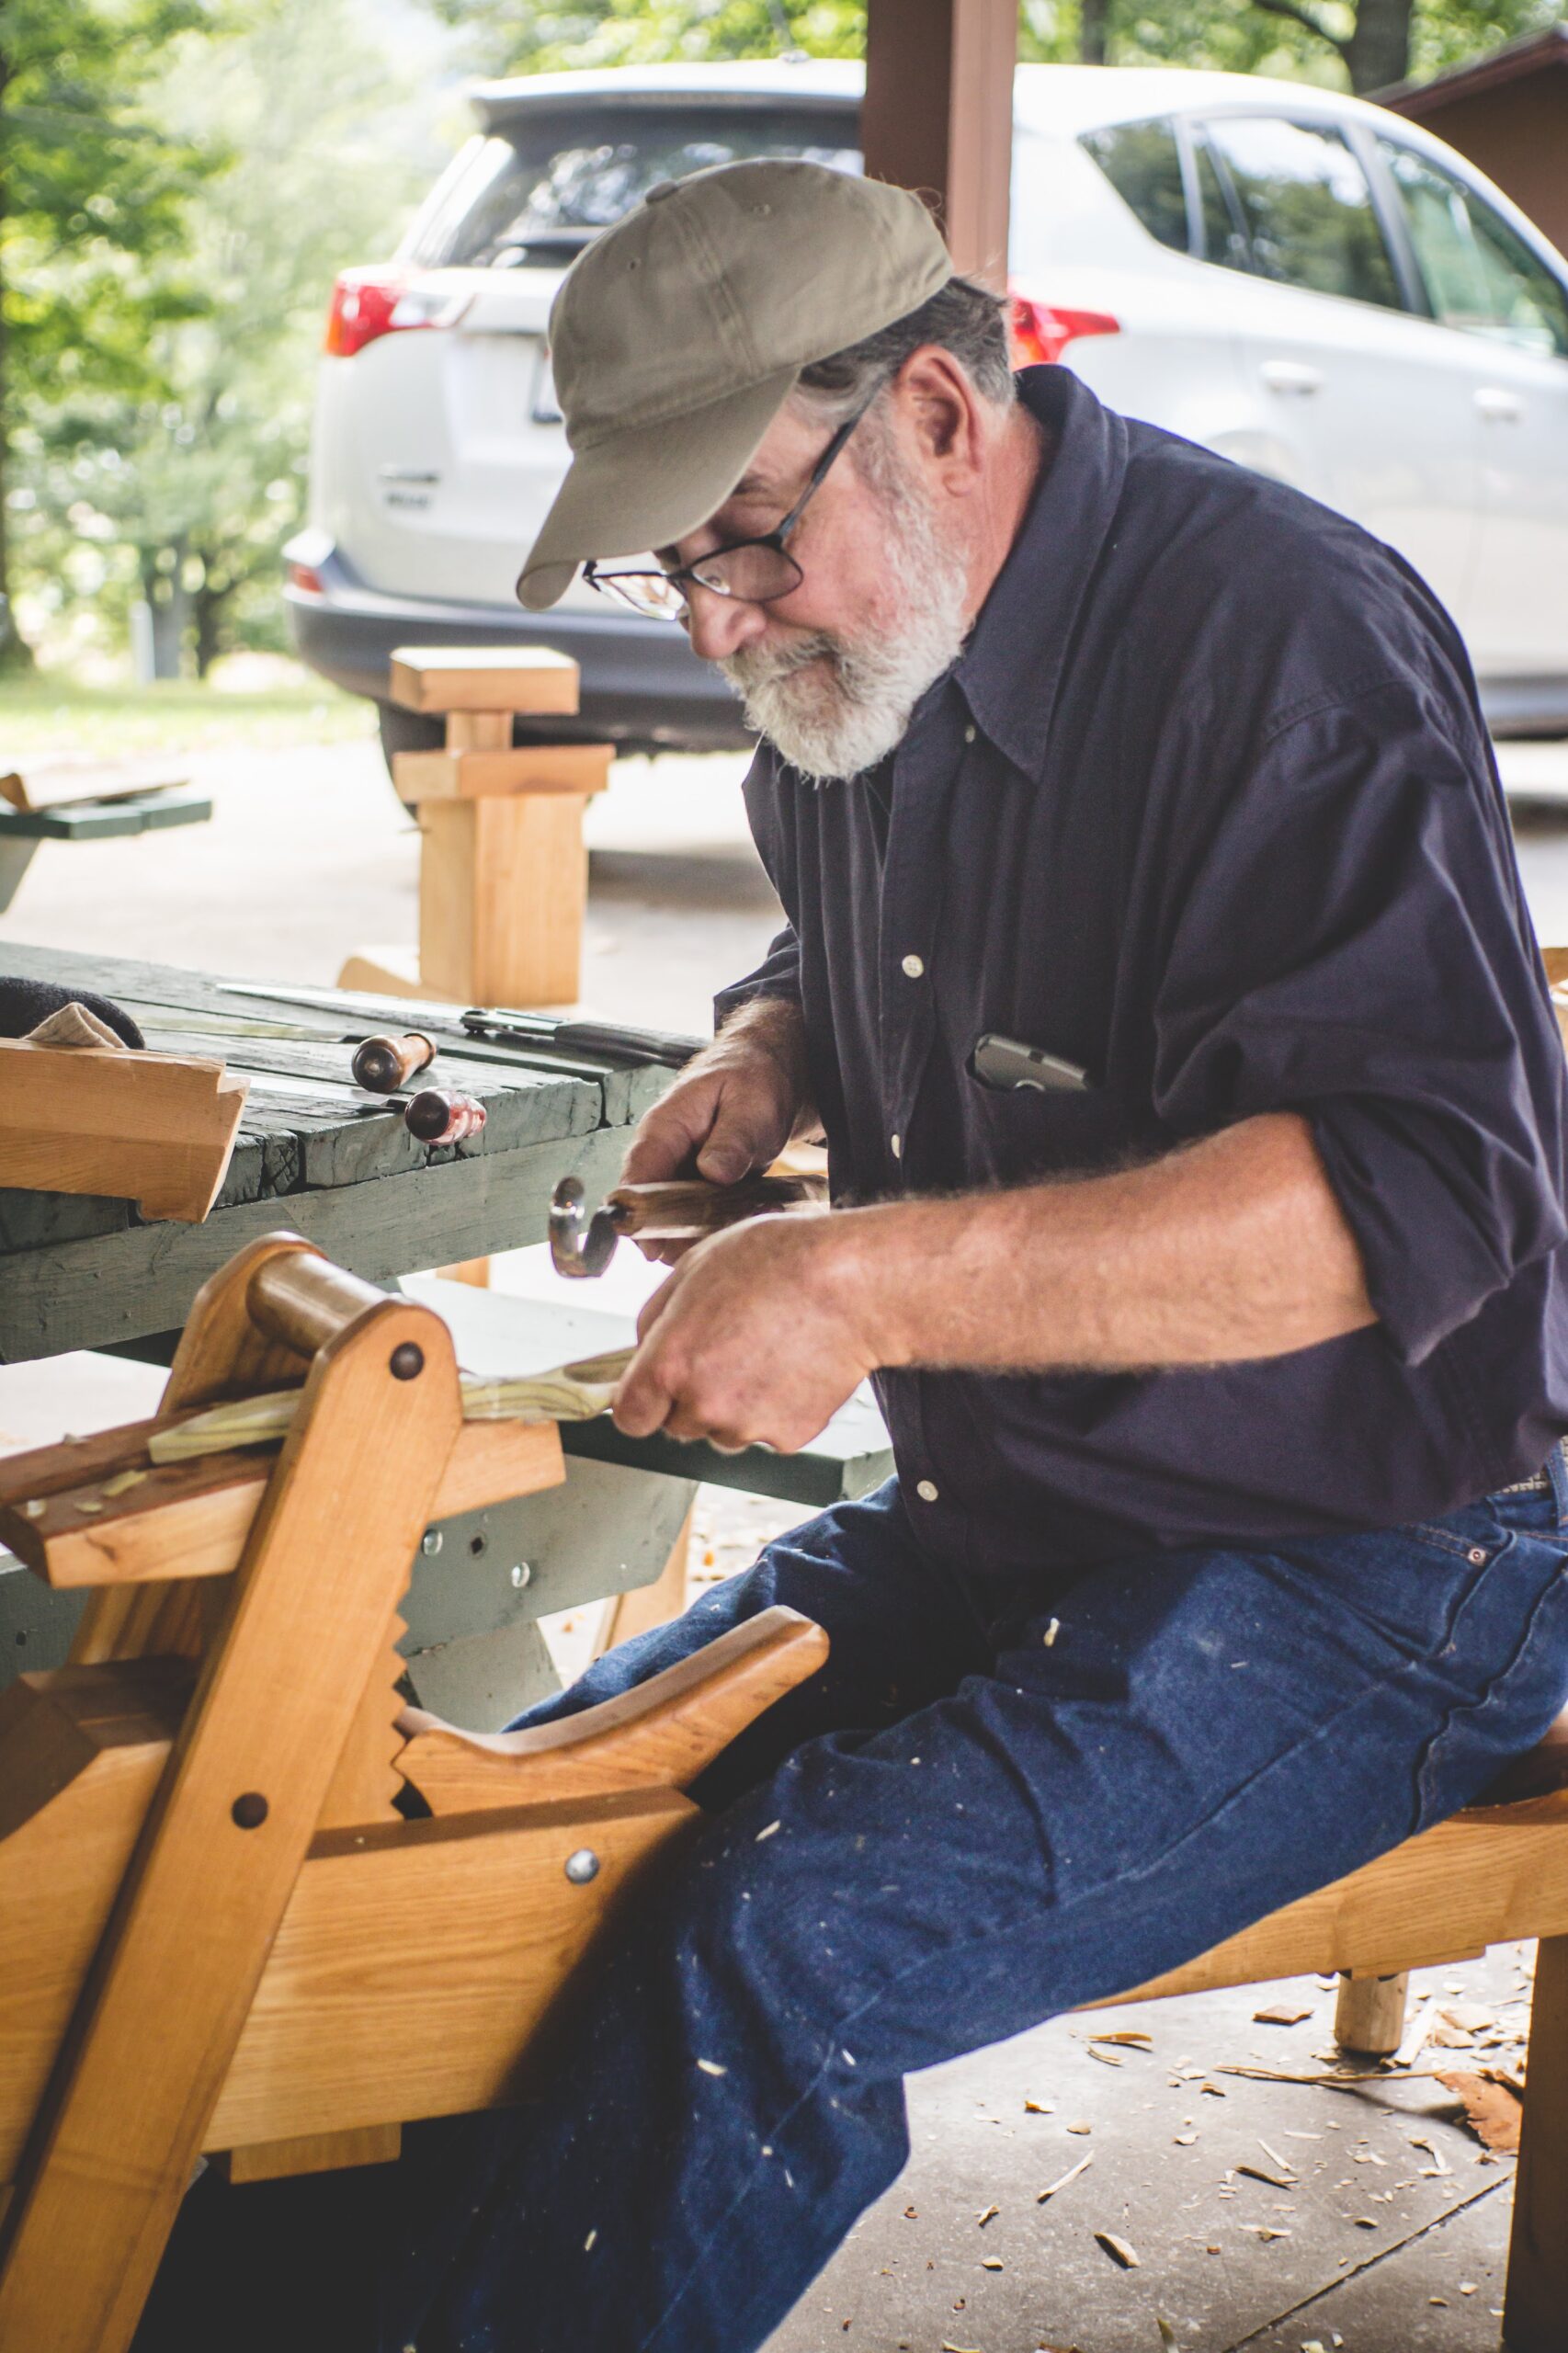 A bearded person of light skin tone sits on a woodworking bench called a shave horse as he carves a wooden spoon. He is wearing a beige baseball hat, glasses, a navy blue button-up shirt and blue denim jeans.